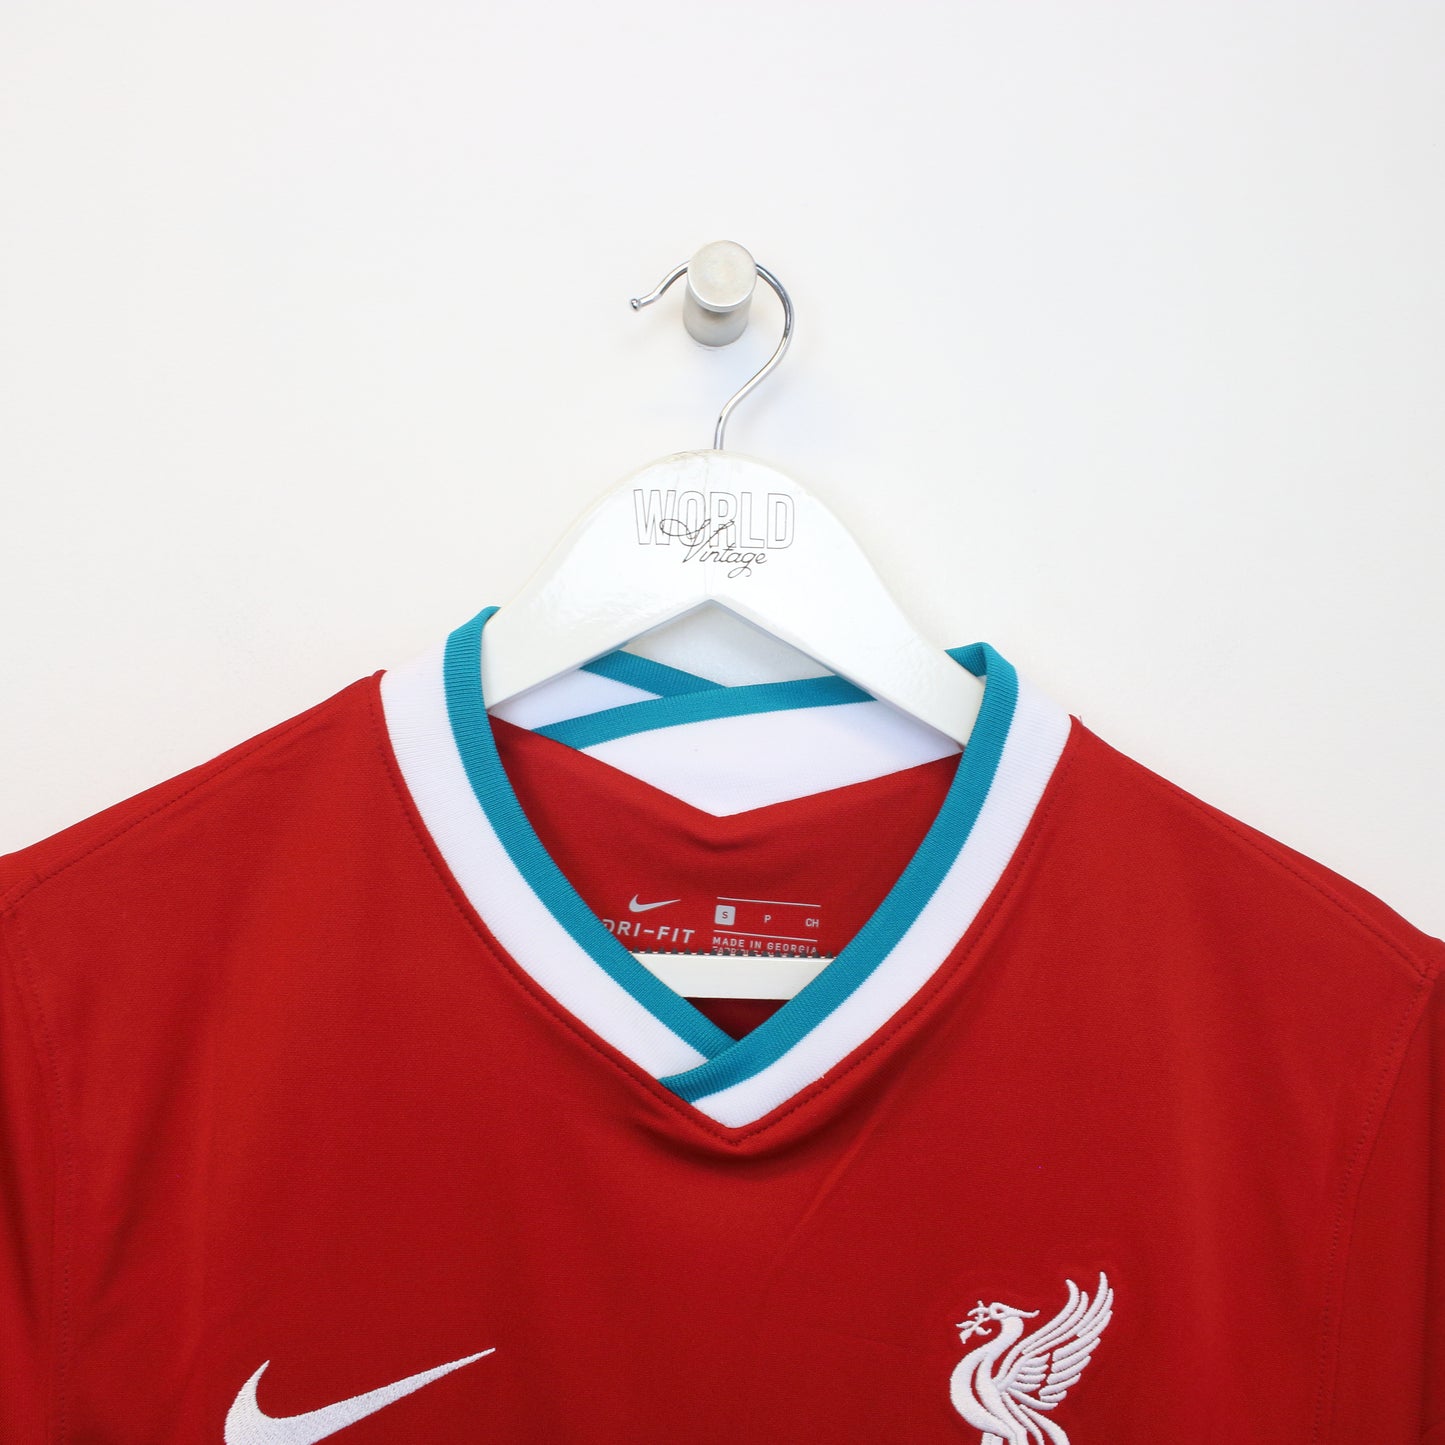 Vintage Liverpool football shirt in red. Best fits S